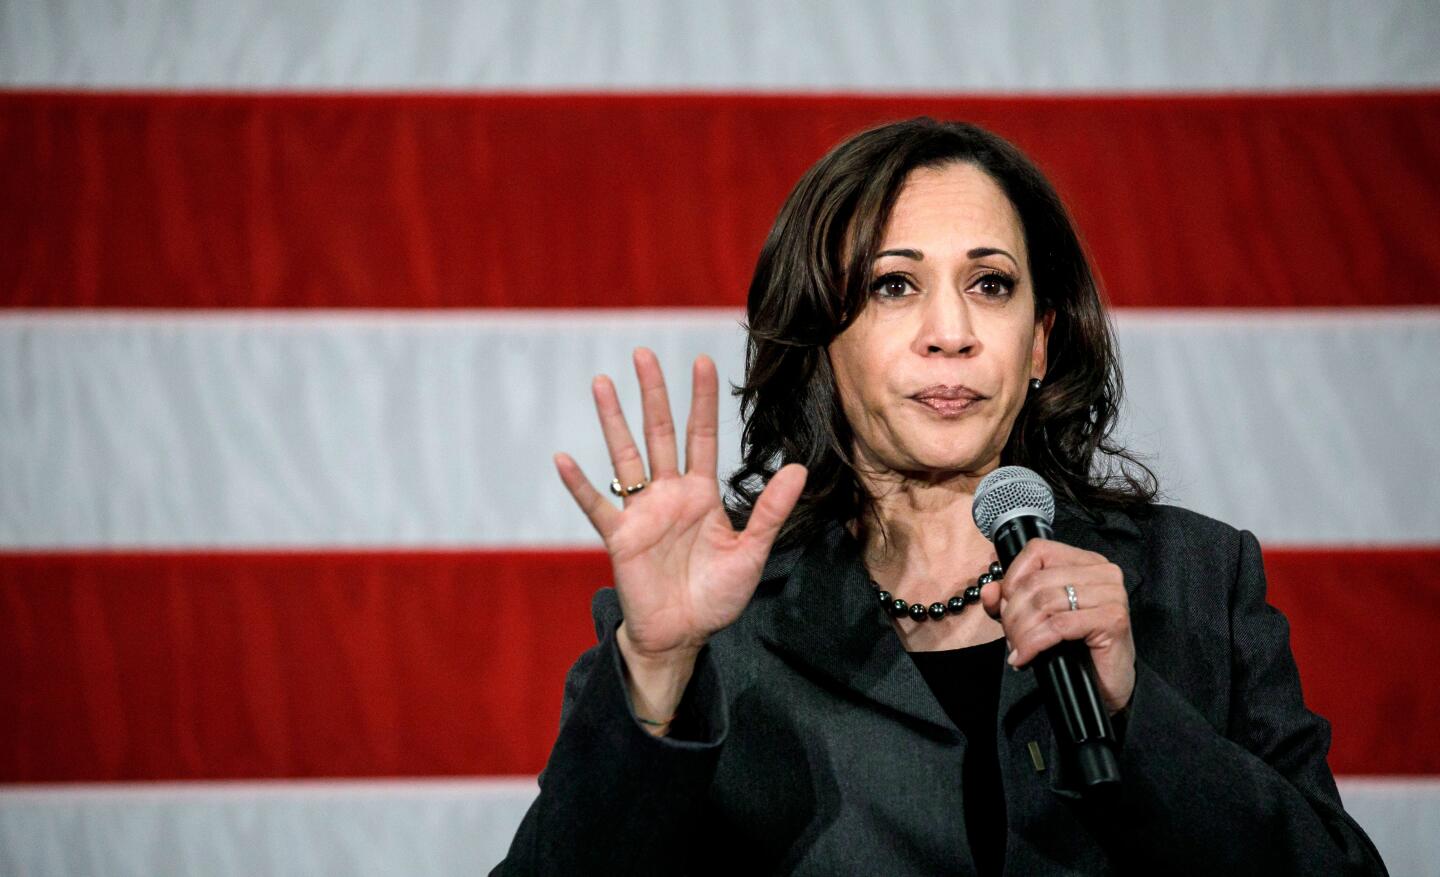 Kamala Harris drops out of the presidential race